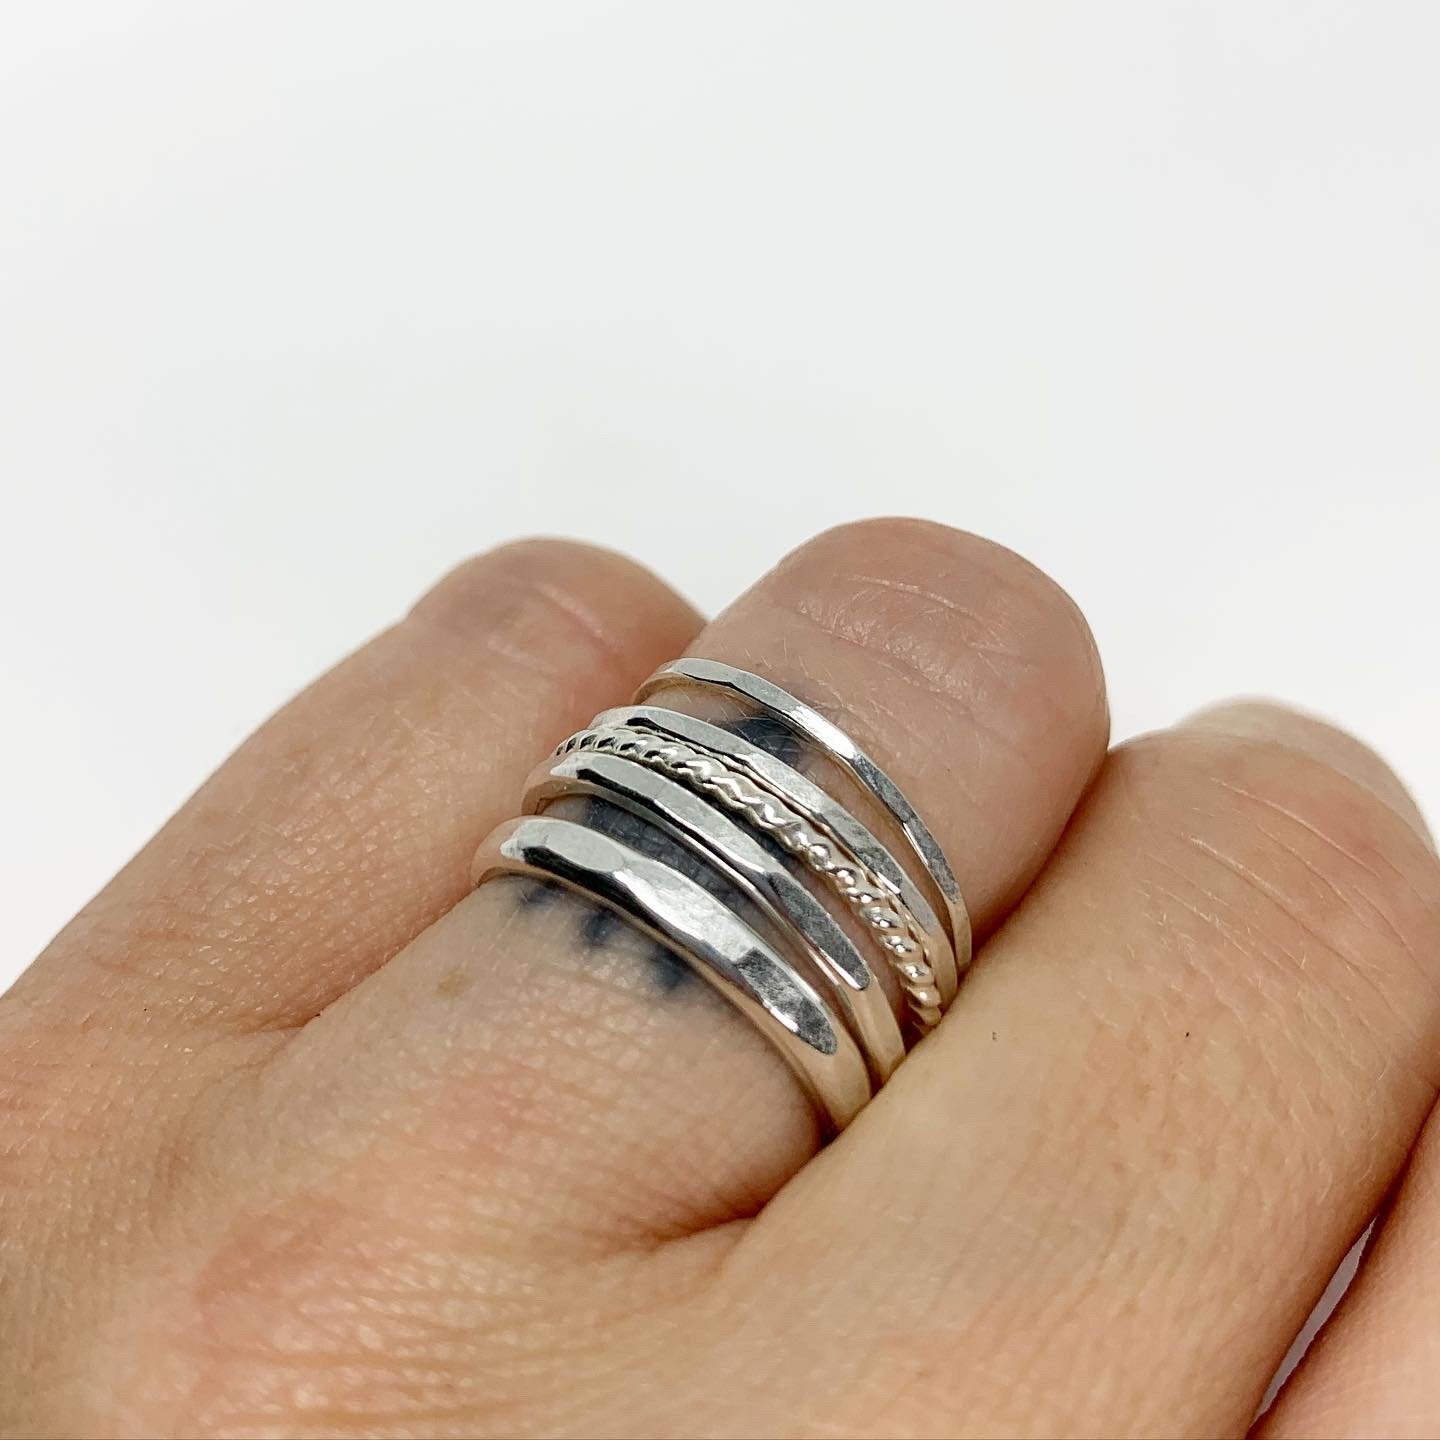 Nature-Inspired Stacking Ring Set for Bridal Bands: Handmade Recycled Sterling Silver Jewelry by Jennifer Cervelli - Jewelry & Watches - Bijou Her -  -  - 